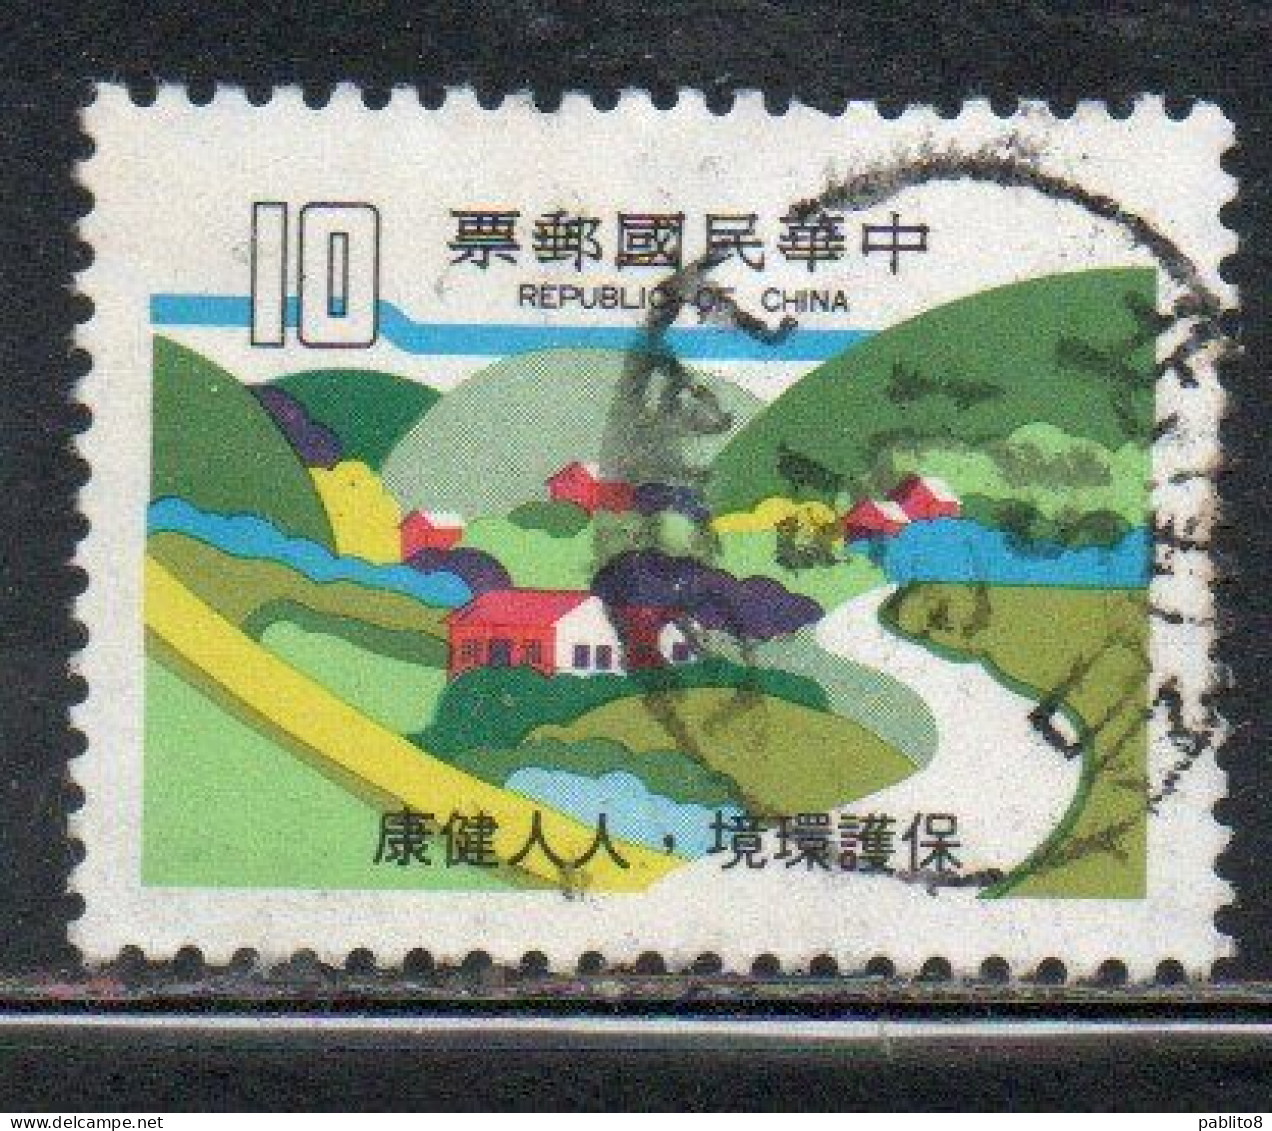 CHINA REPUBLIC CINA TAIWAN FORMOSA 1979 PROTECTION OF THE ENVIRONMENT RURAL LANDSCAPE 10$ USED USATO OBLITERE' - Oblitérés